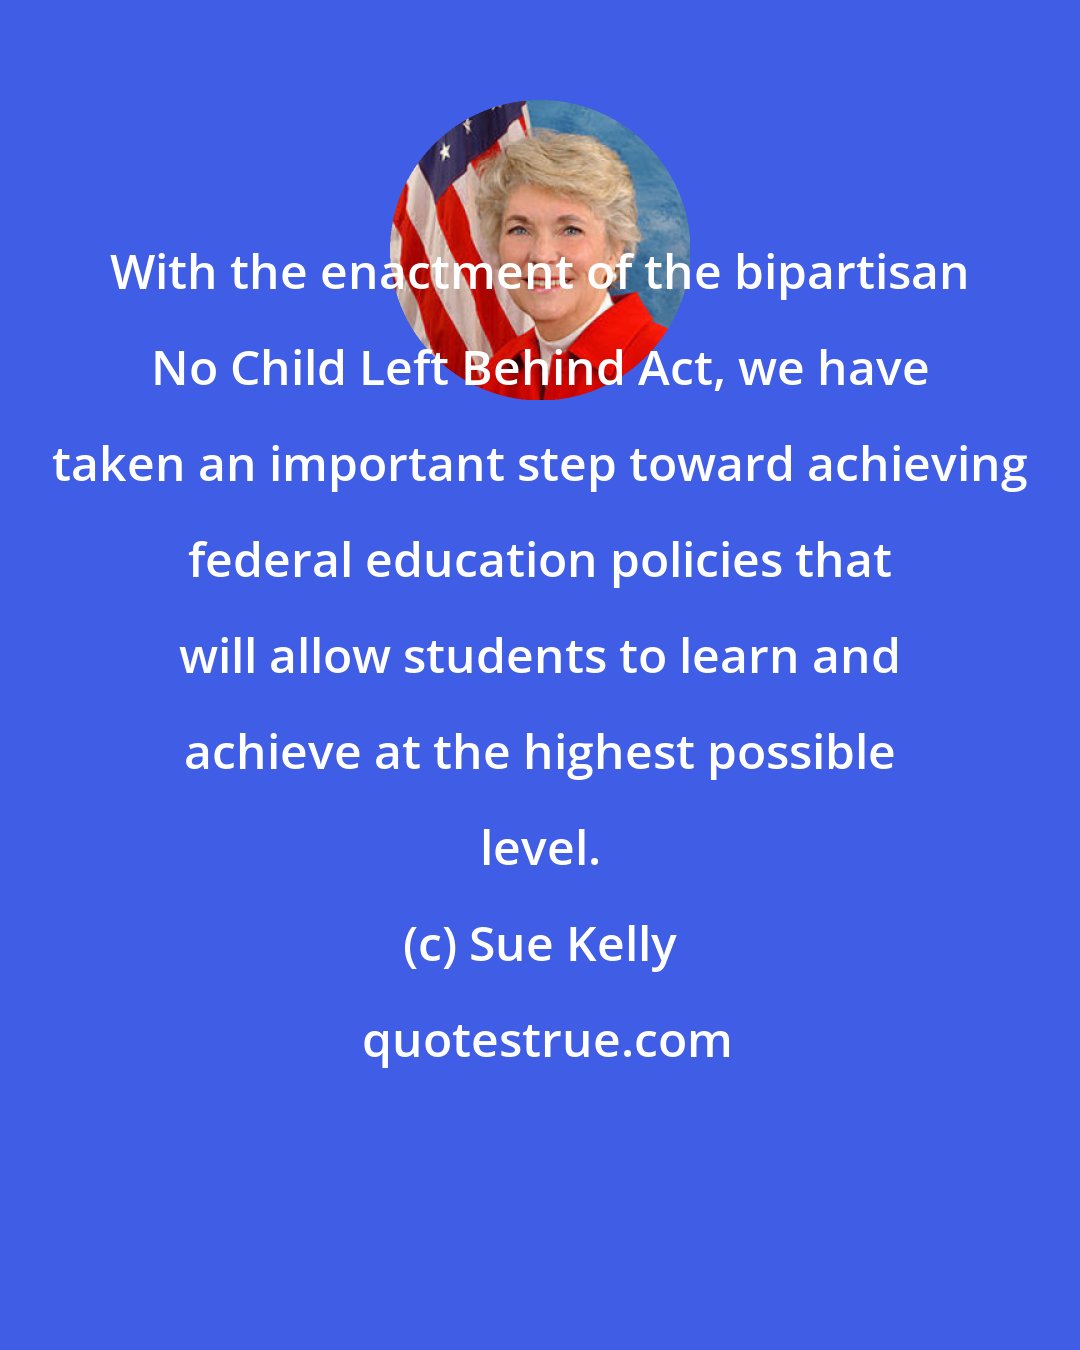 Sue Kelly: With the enactment of the bipartisan No Child Left Behind Act, we have taken an important step toward achieving federal education policies that will allow students to learn and achieve at the highest possible level.